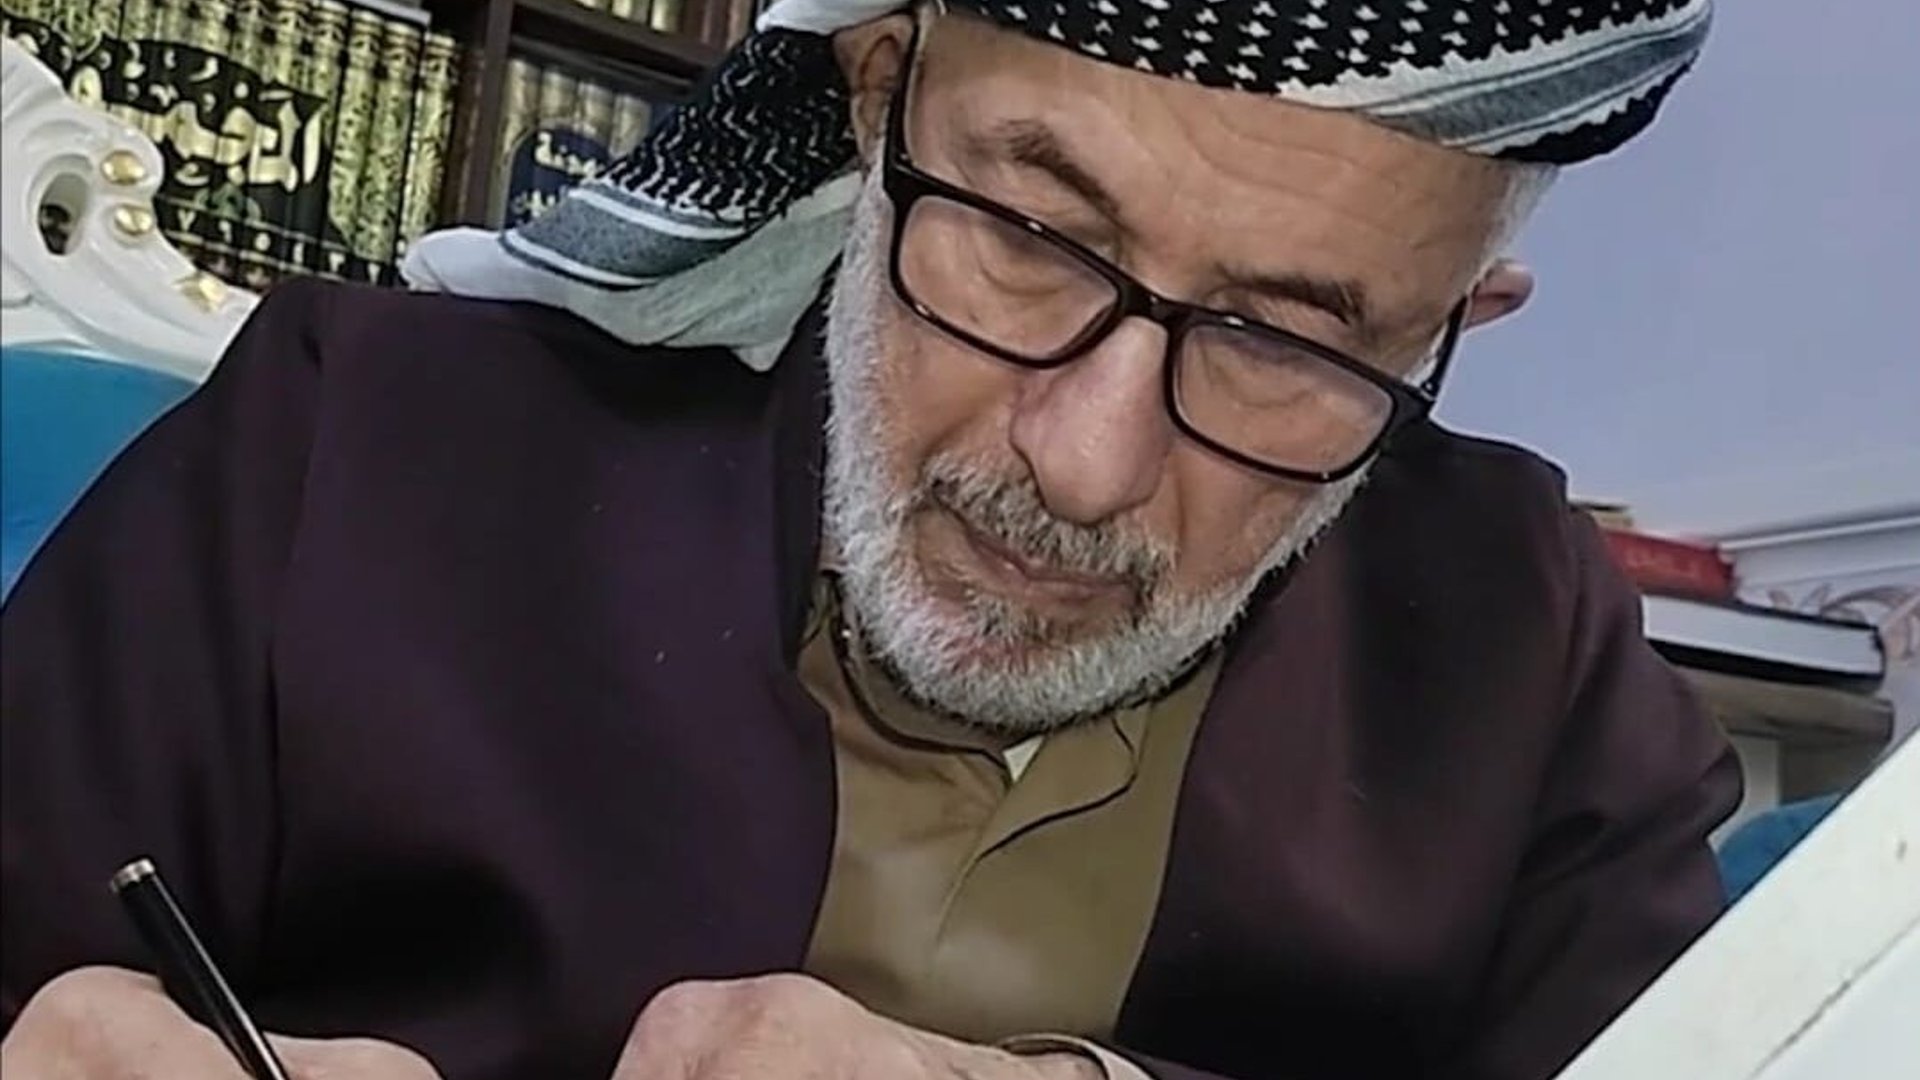 Salih Mohammed Amins quest to hand write the Quran